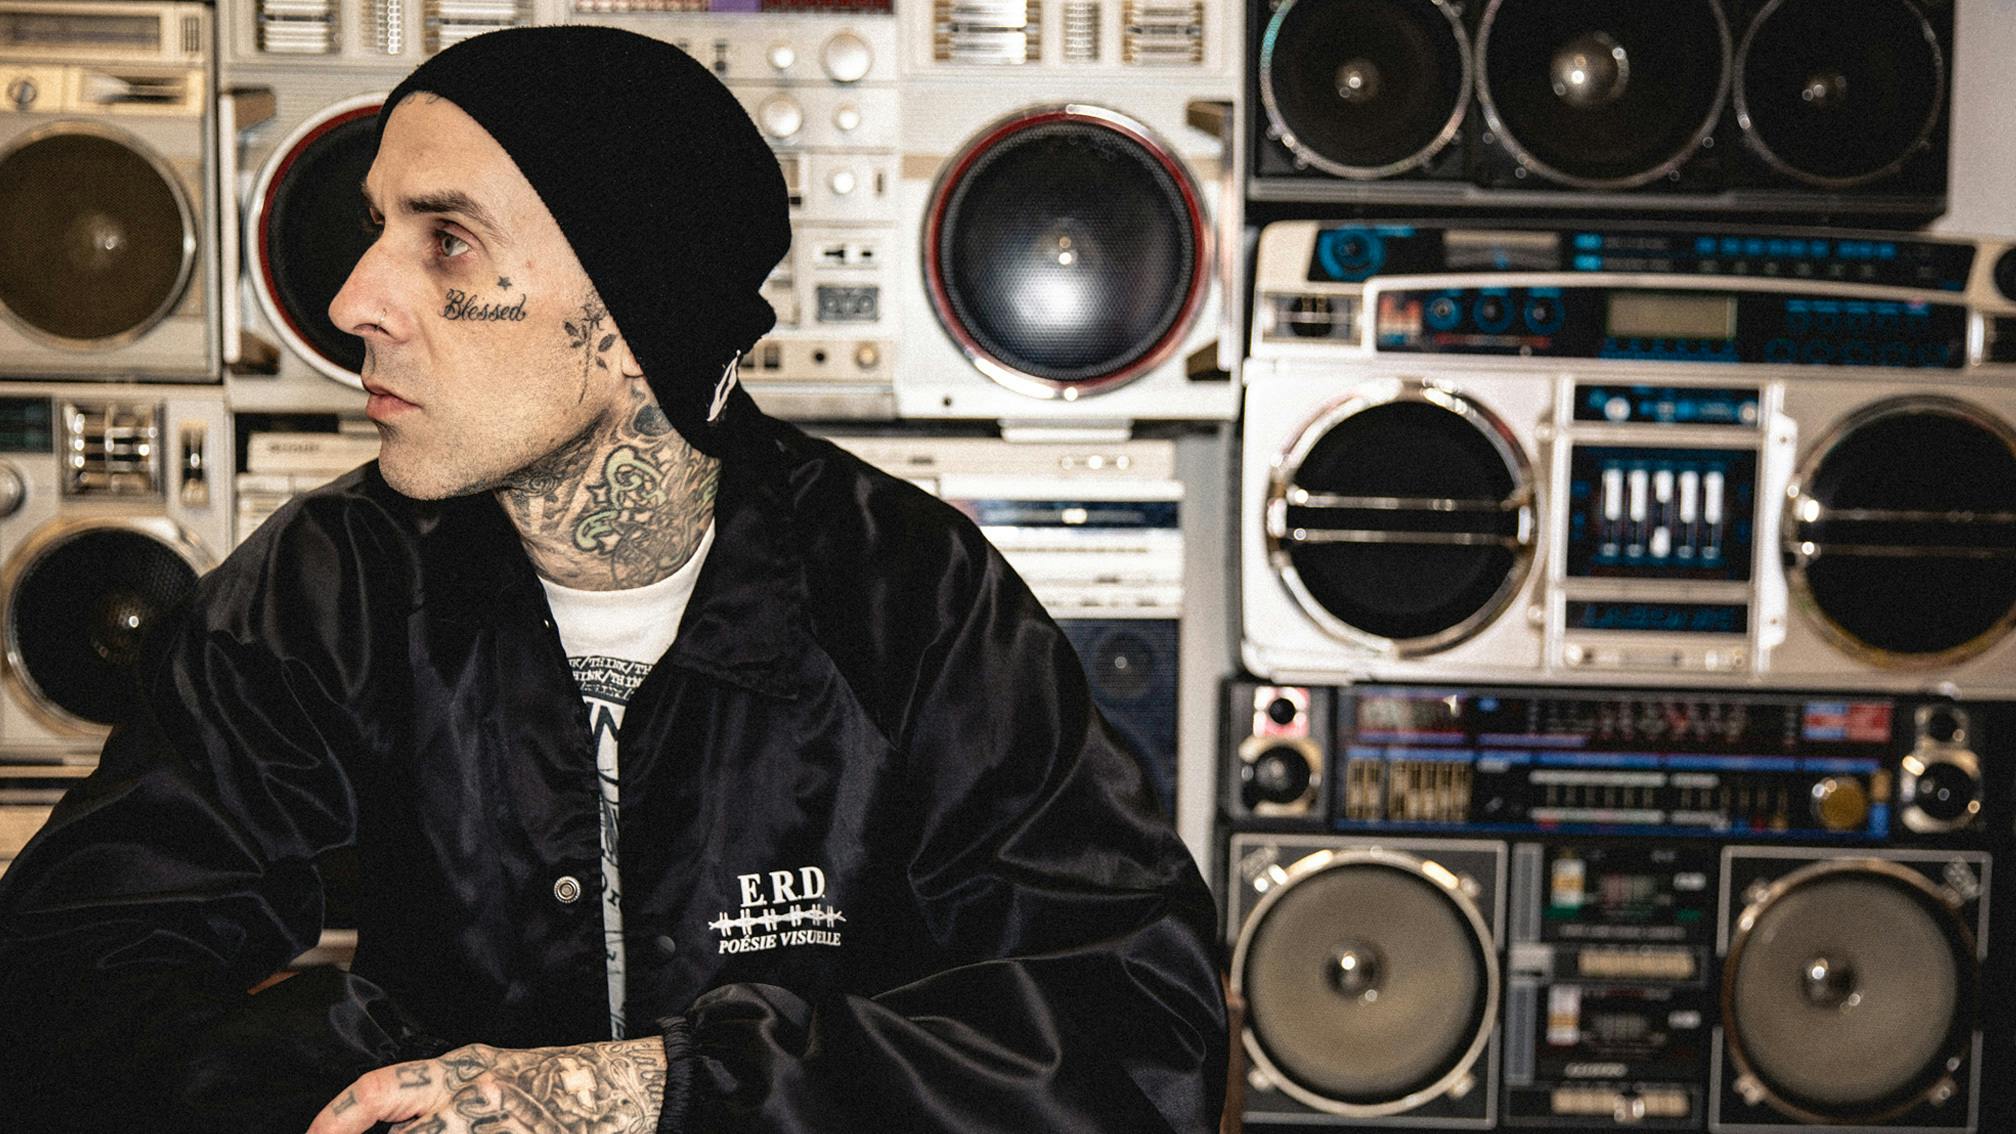 blink-182's Travis Barker to sell Adam's Song drum kit and other used gear